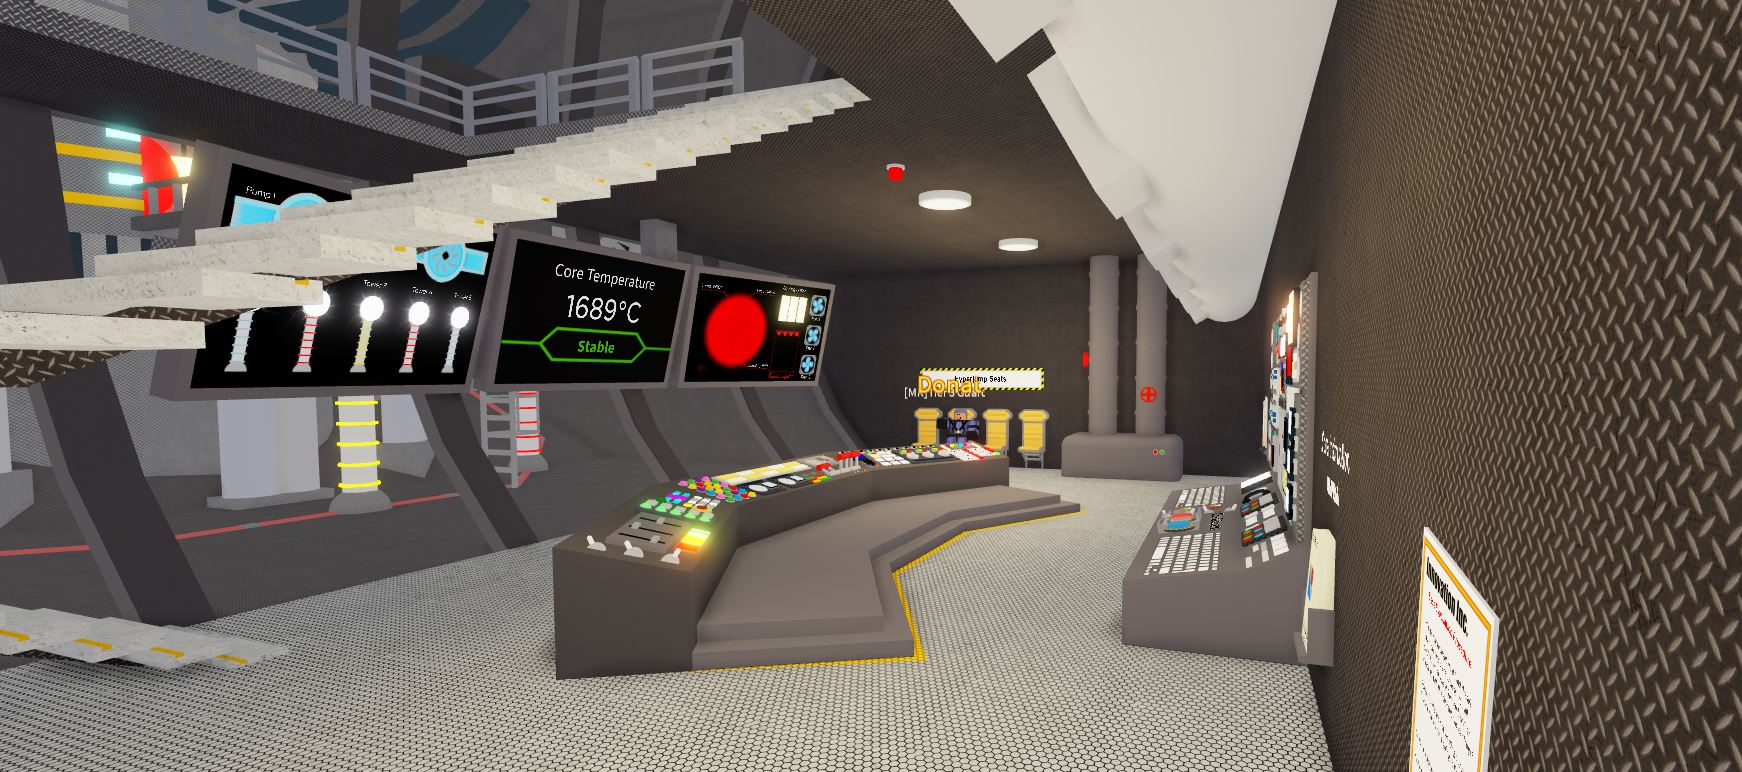 Core Control Room Unofficial Innovation Inc Spaceship Wiki Fandom - innovation inc spaceship roblox where is core